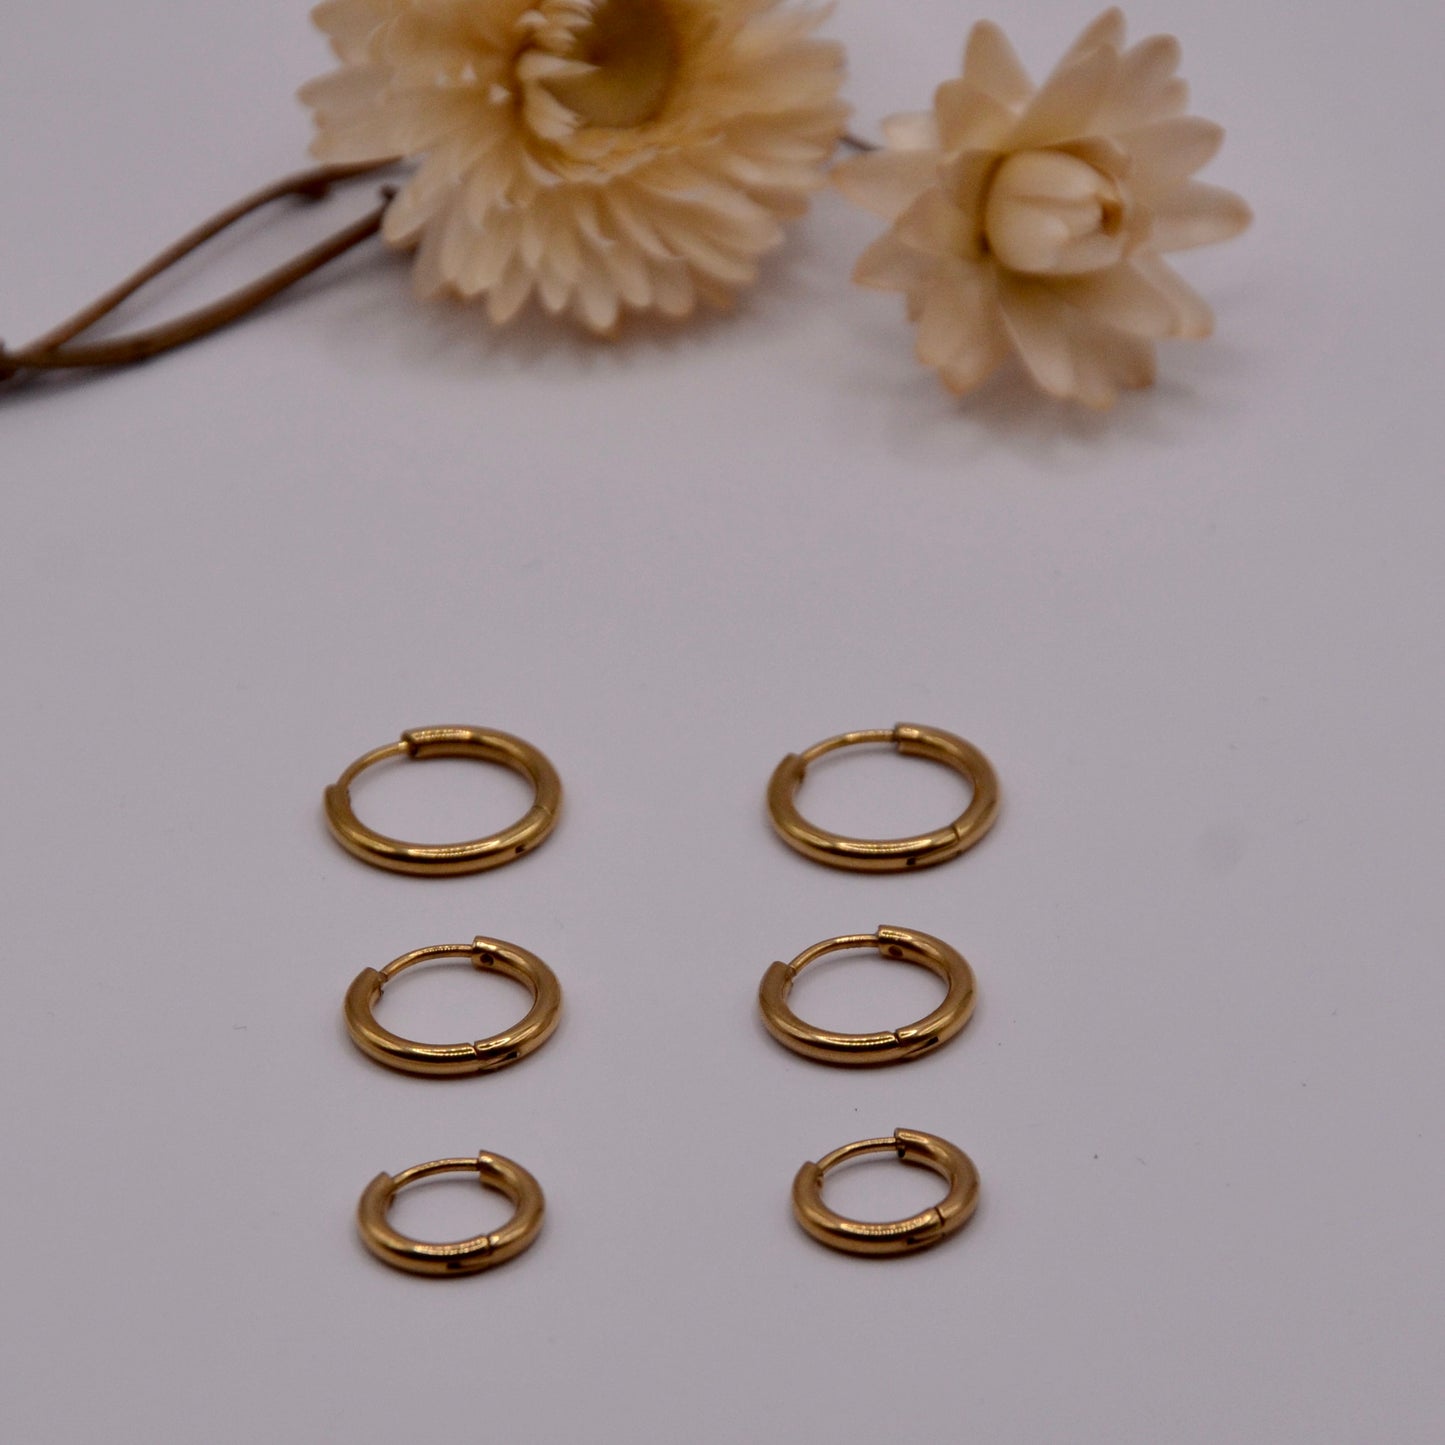 The Introvert Earring Set